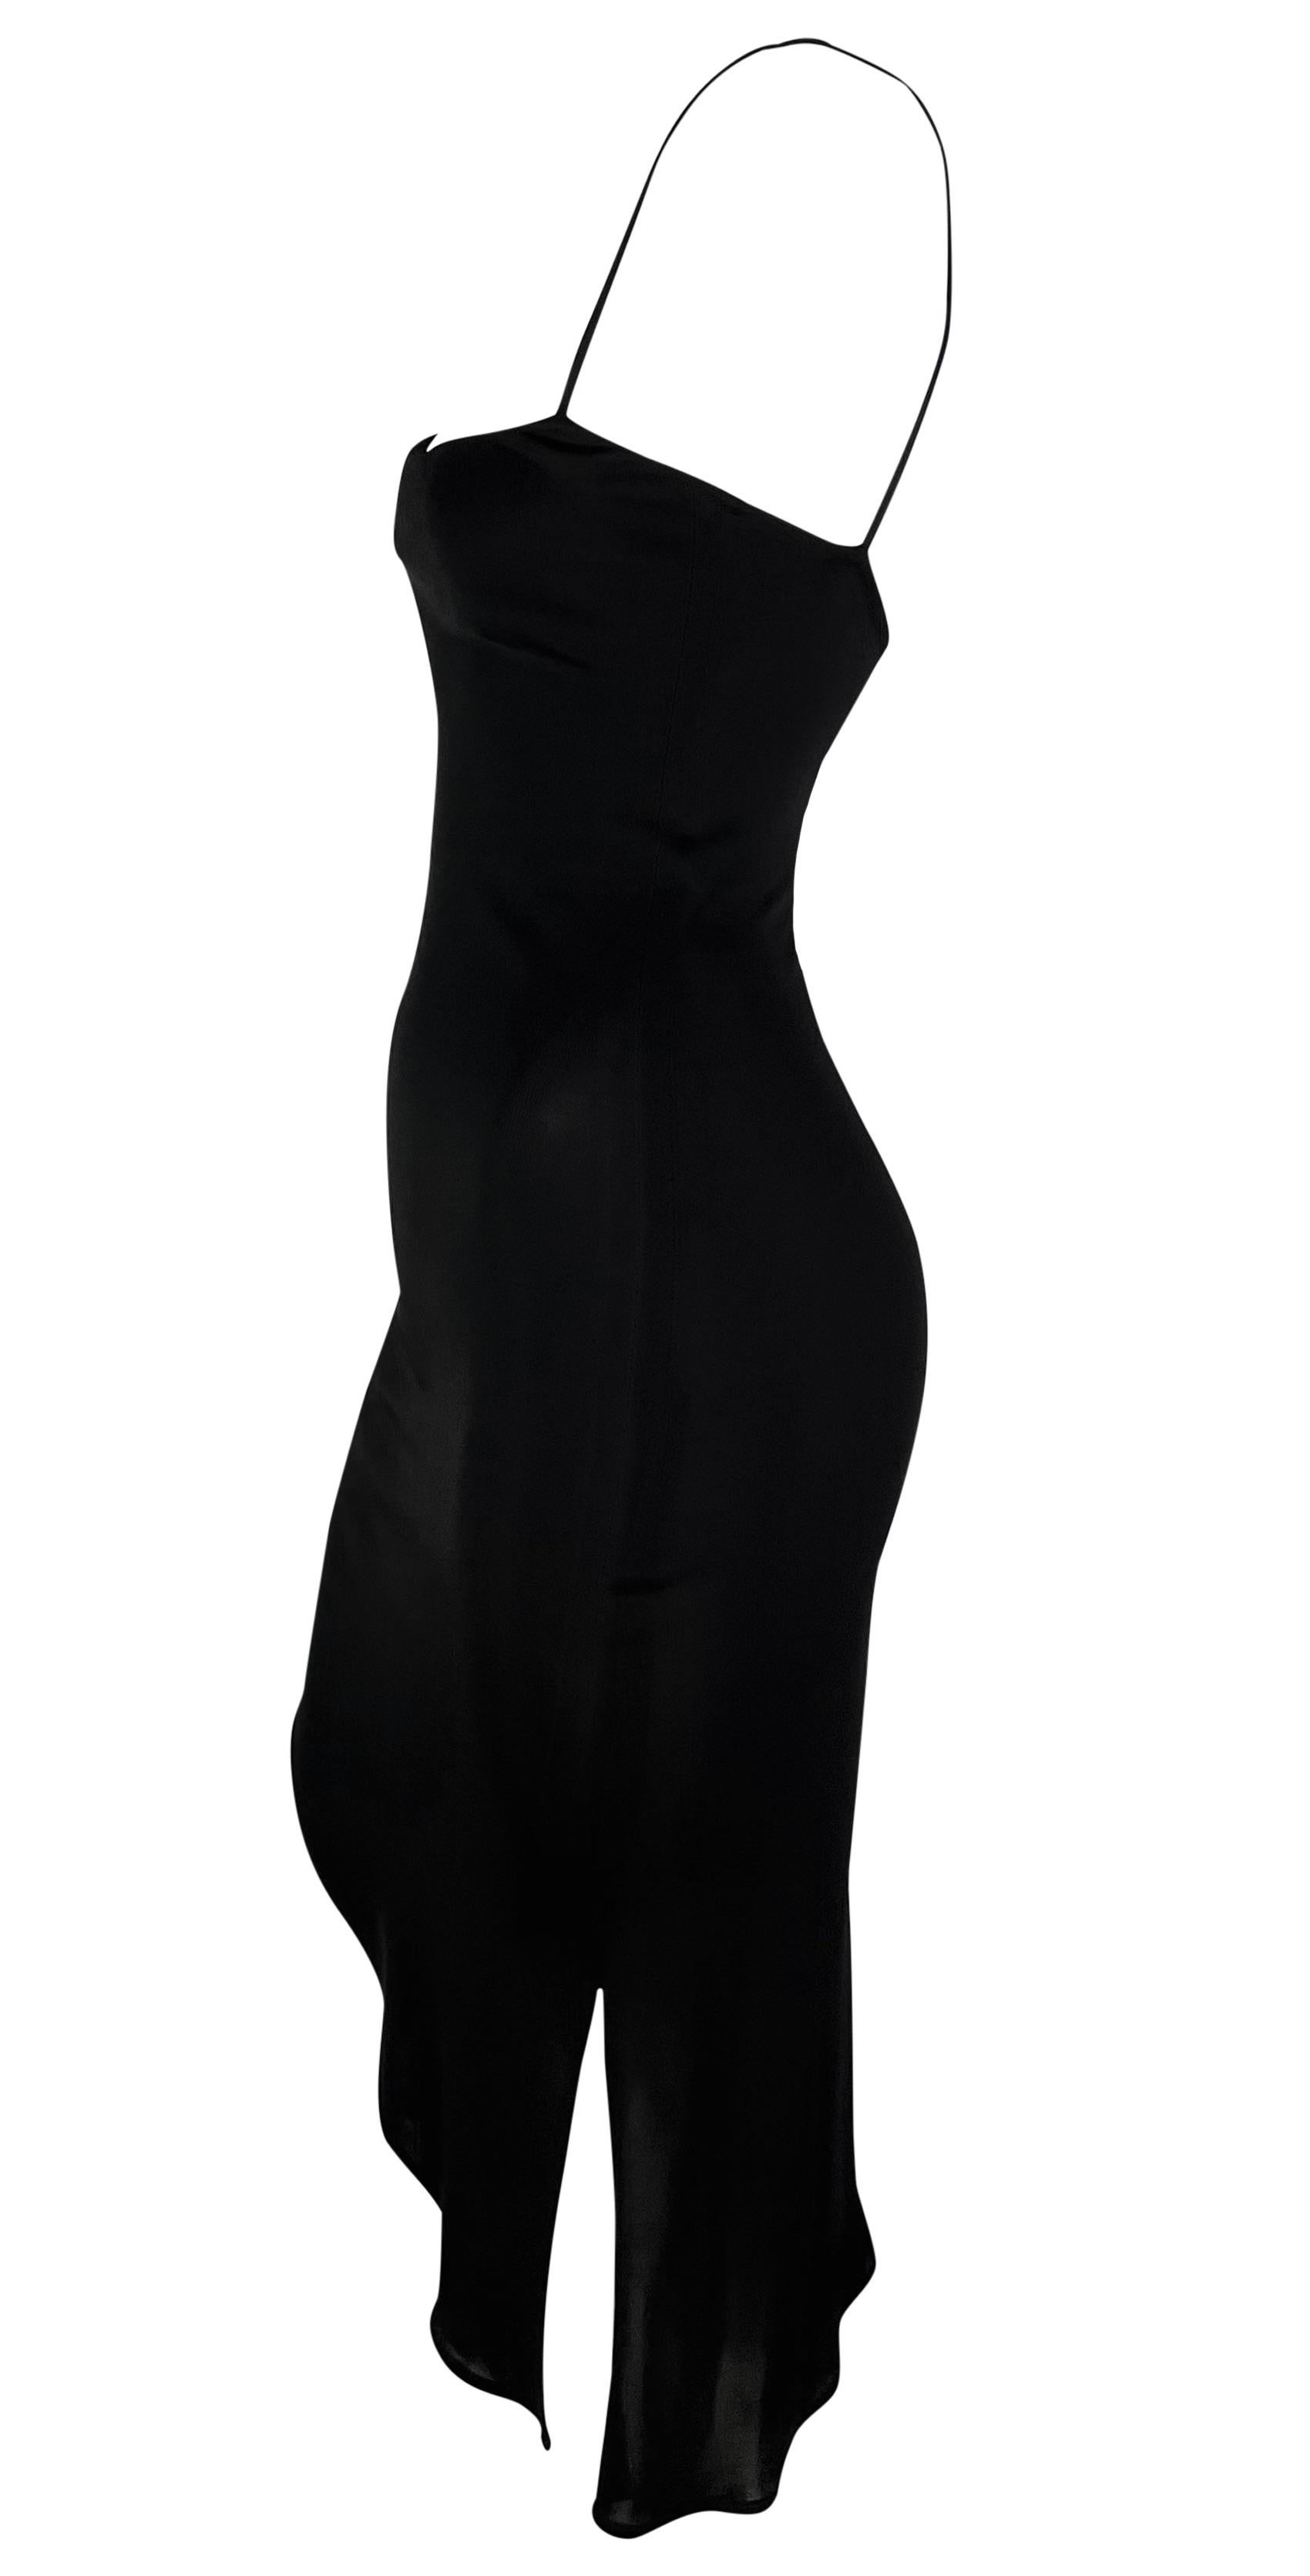 From the early 2000s, this slinky black asymmetric slip dress by Yigal Azrouel embodies the quintessential sexy little black dress for a night out. The slip-style design includes delicate spaghetti straps, a chic square neckline, and an asymmetric